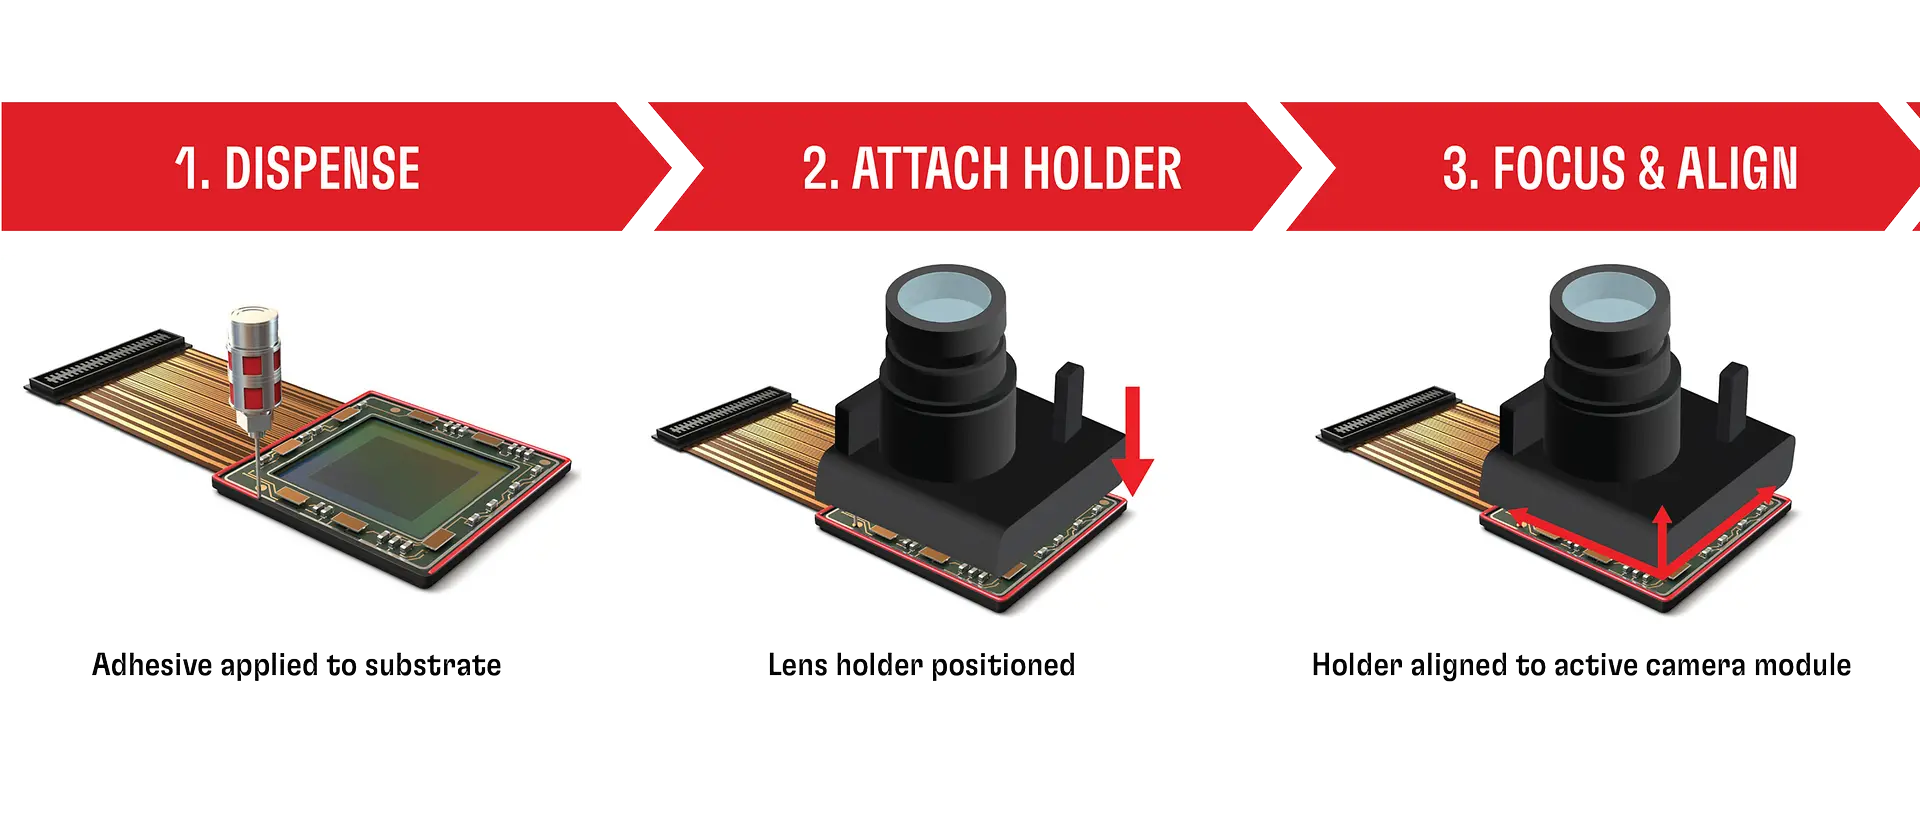 
Camera module assembly process with 1-step cure active alignment adhesive reduces process cycle time and energy consumption compared to a regular active alignment process.